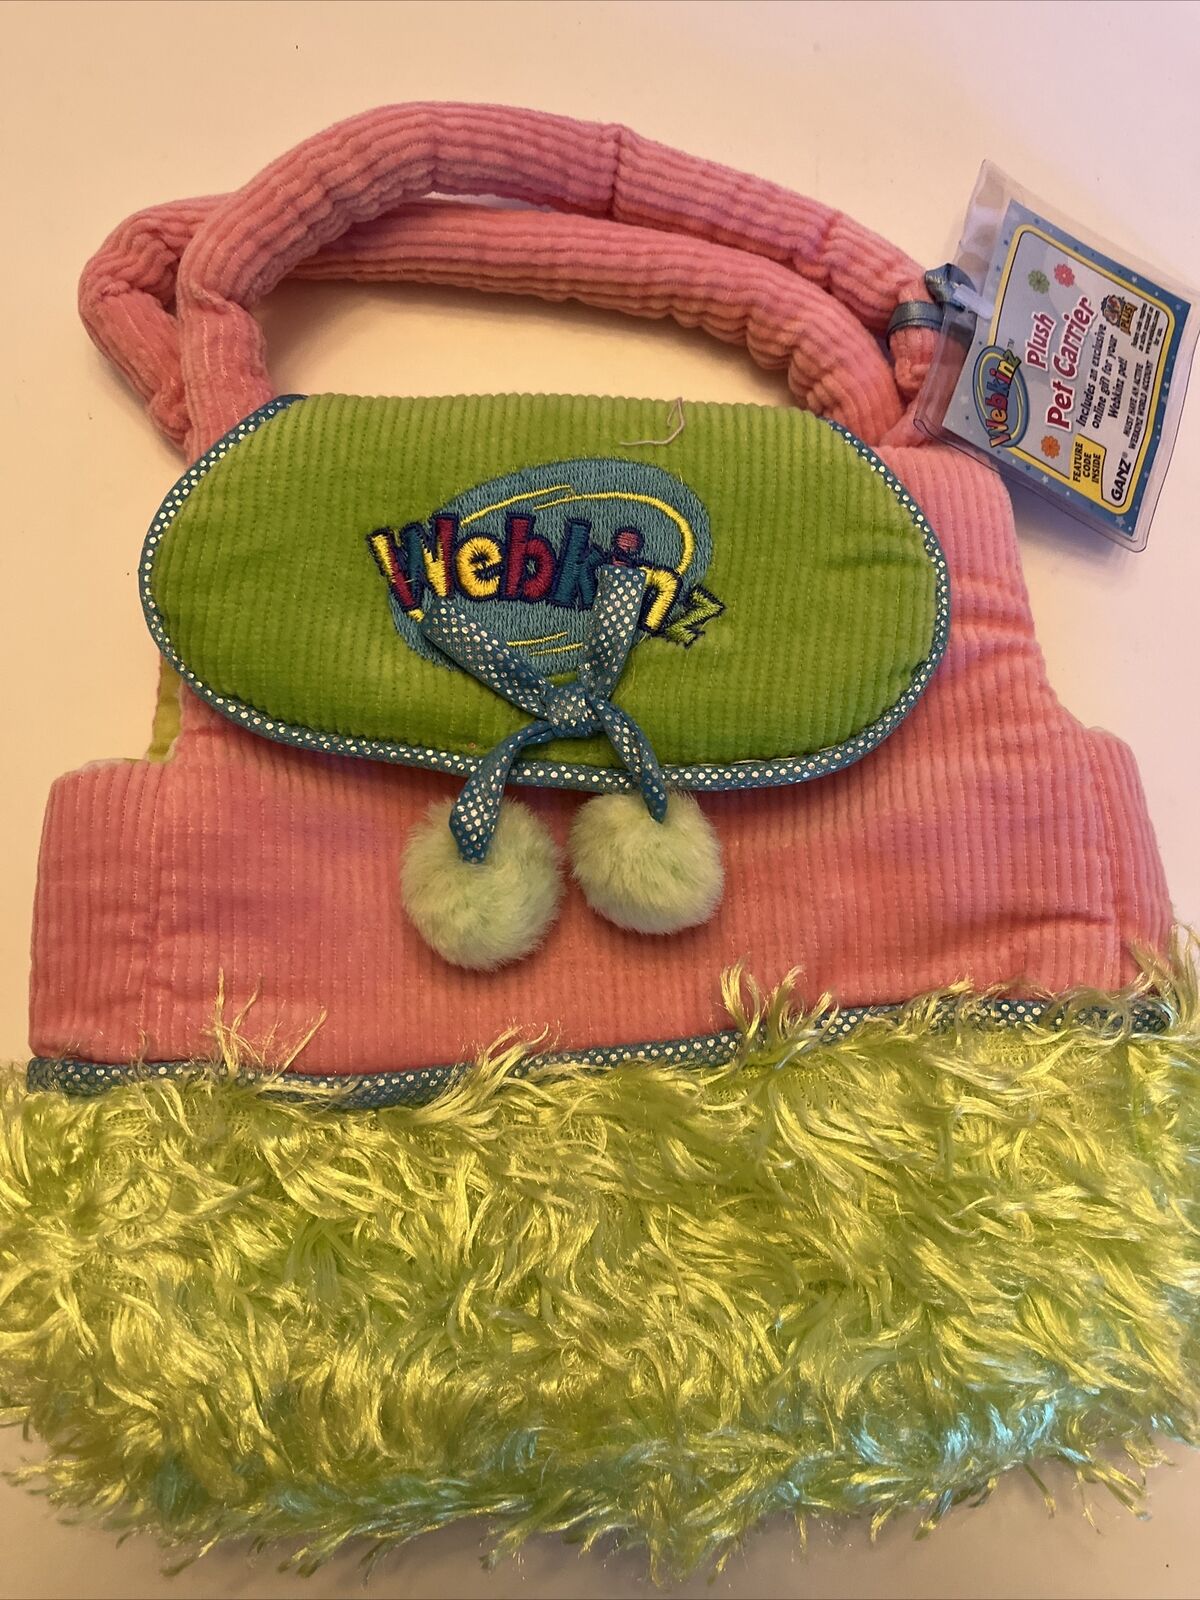 New Ganz Webkinz Plush Pet Carrier Purse Pink & Green With Tag & Code